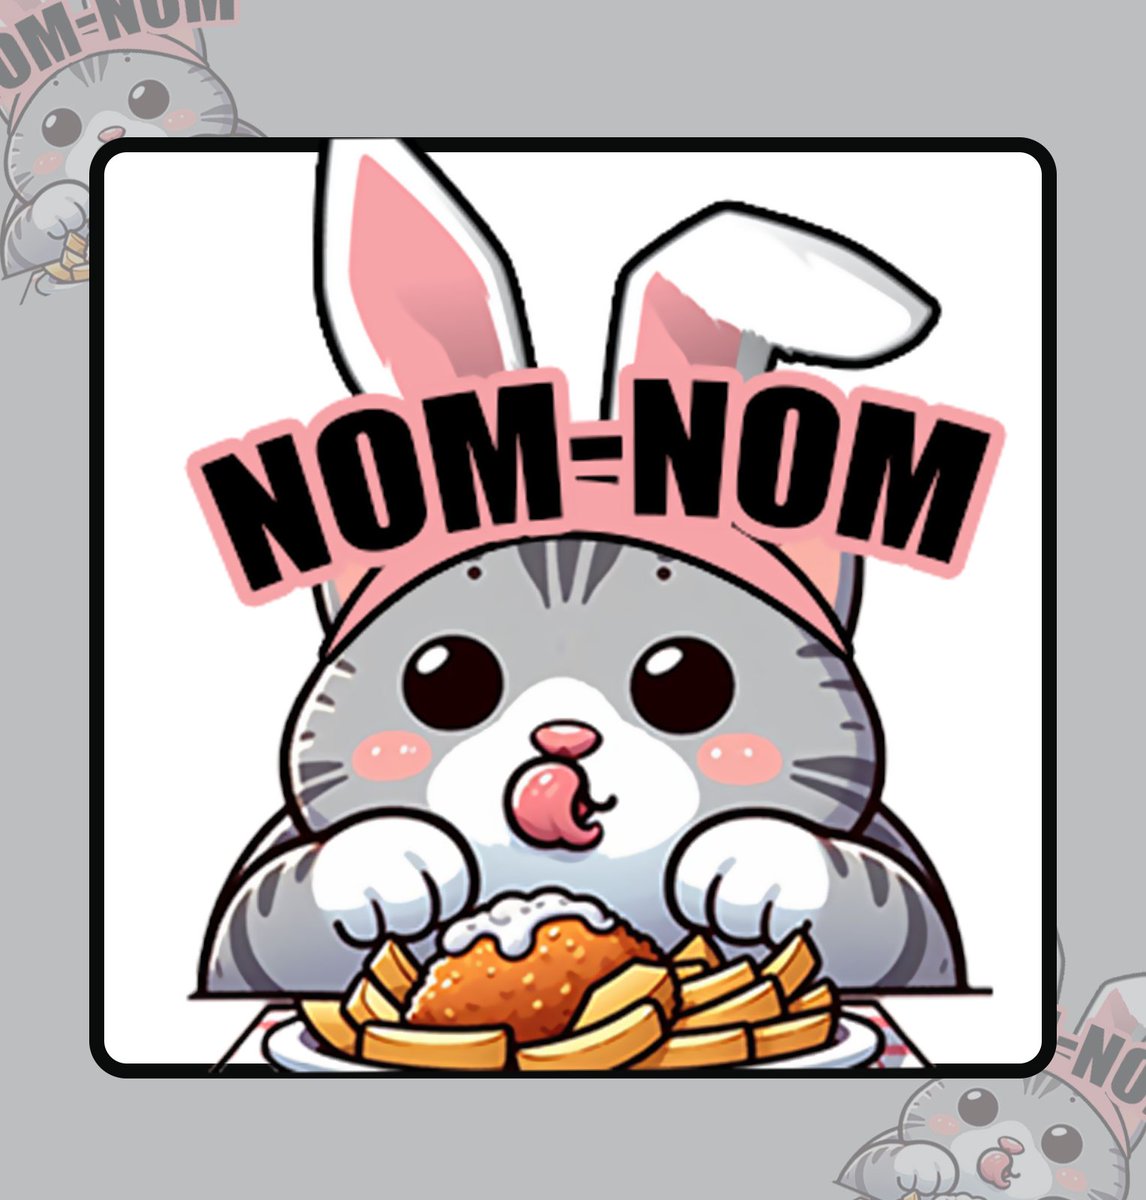 creating deliciously appealing nom nom-themed profile pics. Let's cook up some tasty designs together! 🎨🍴 #NomNomPFP #NomNomArt #YumDesigns #GraphicEats #TastyGraphics #FoodieCreations #NomNomPics #DelishDesigns #NomNomInspo #GraphicGourmet #DesignsThatMakeYouHungry